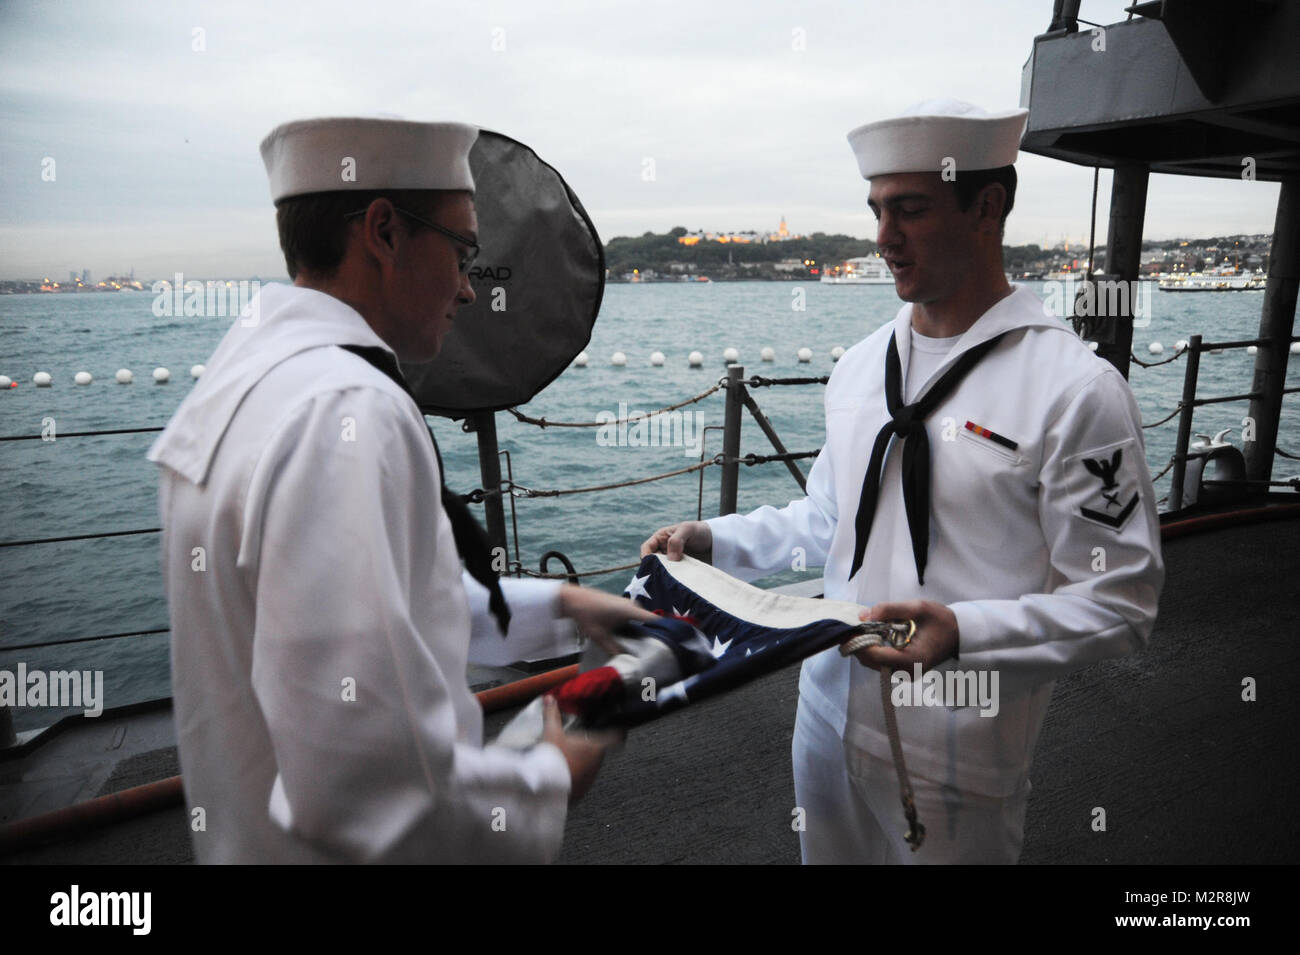 111014-N-RB564-011: ISTANBUL, Turkey (Oct. 14, 2011) — Seaman Apprentice Stephen Carr and Cryptologic Technician (Technical) 3rd Class Jacob Blackwell fold the U. S. flag following evening colors aboard the guided-missile cruiser USS Philippine Sea (CG 58) while in port Istanbul, during a four-day port visit. Philippine Sea is on a regularly scheduled deployment in the Black Sea and serves to promote peace and security in the U.S. 6th Fleet area of responsibility. (U.S. Navy photo by Mass Communication Specialist 2nd Class Gary Prill/Released) 111014-N-RB564-011 by EUCOM Stock Photo